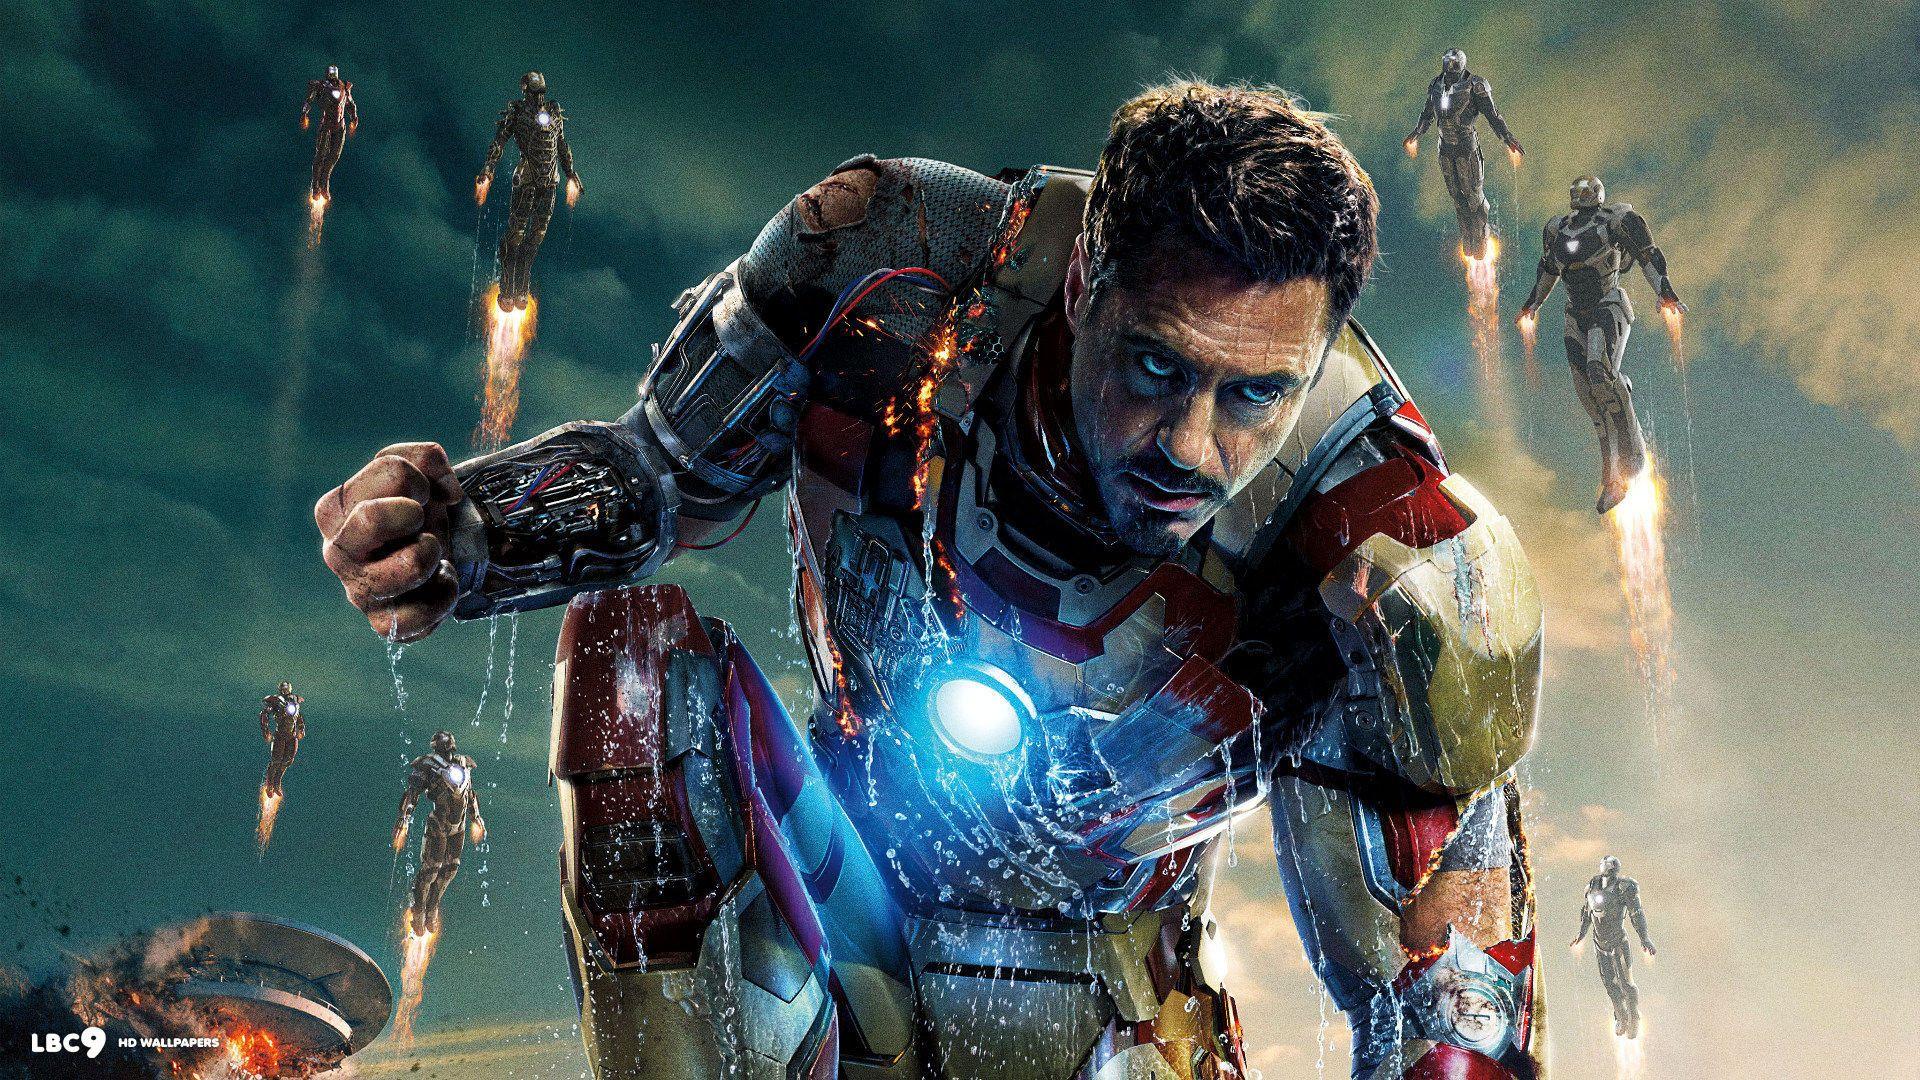 Iron Man 3 download the last version for apple